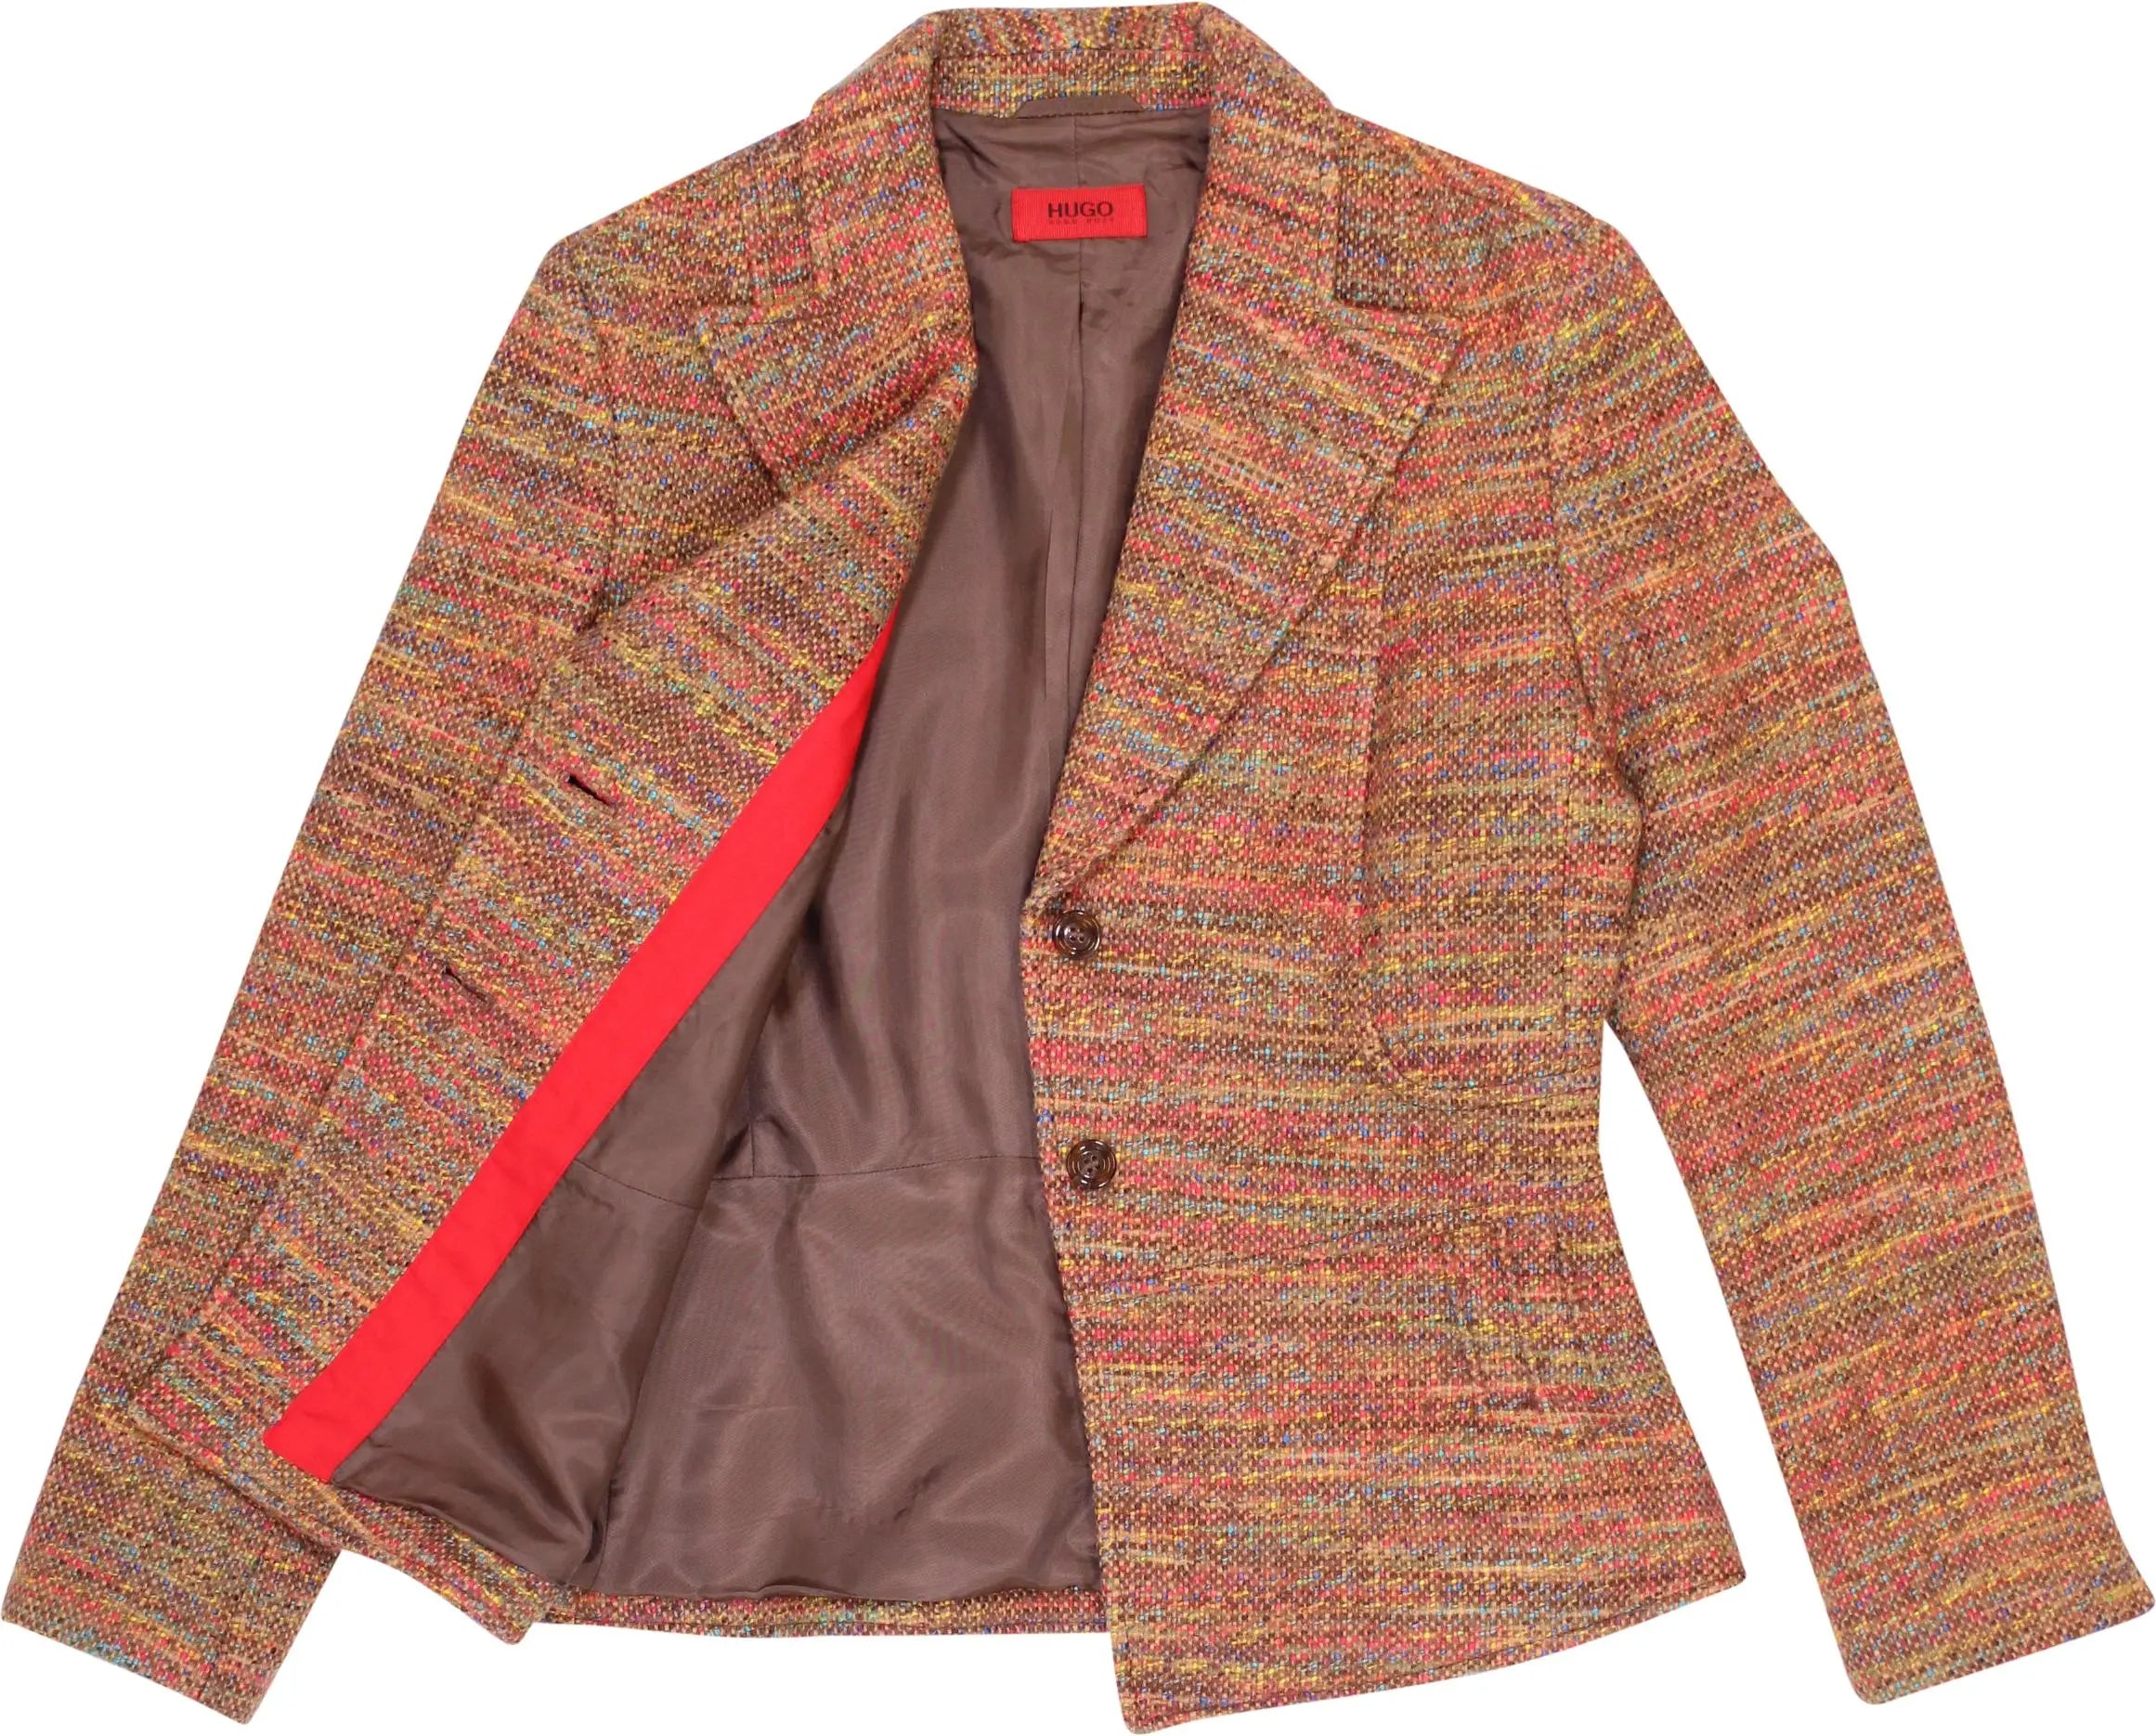 Hugo Boss - Woven Colourful Blazer by Hugo Boss- ThriftTale.com - Vintage and second handclothing